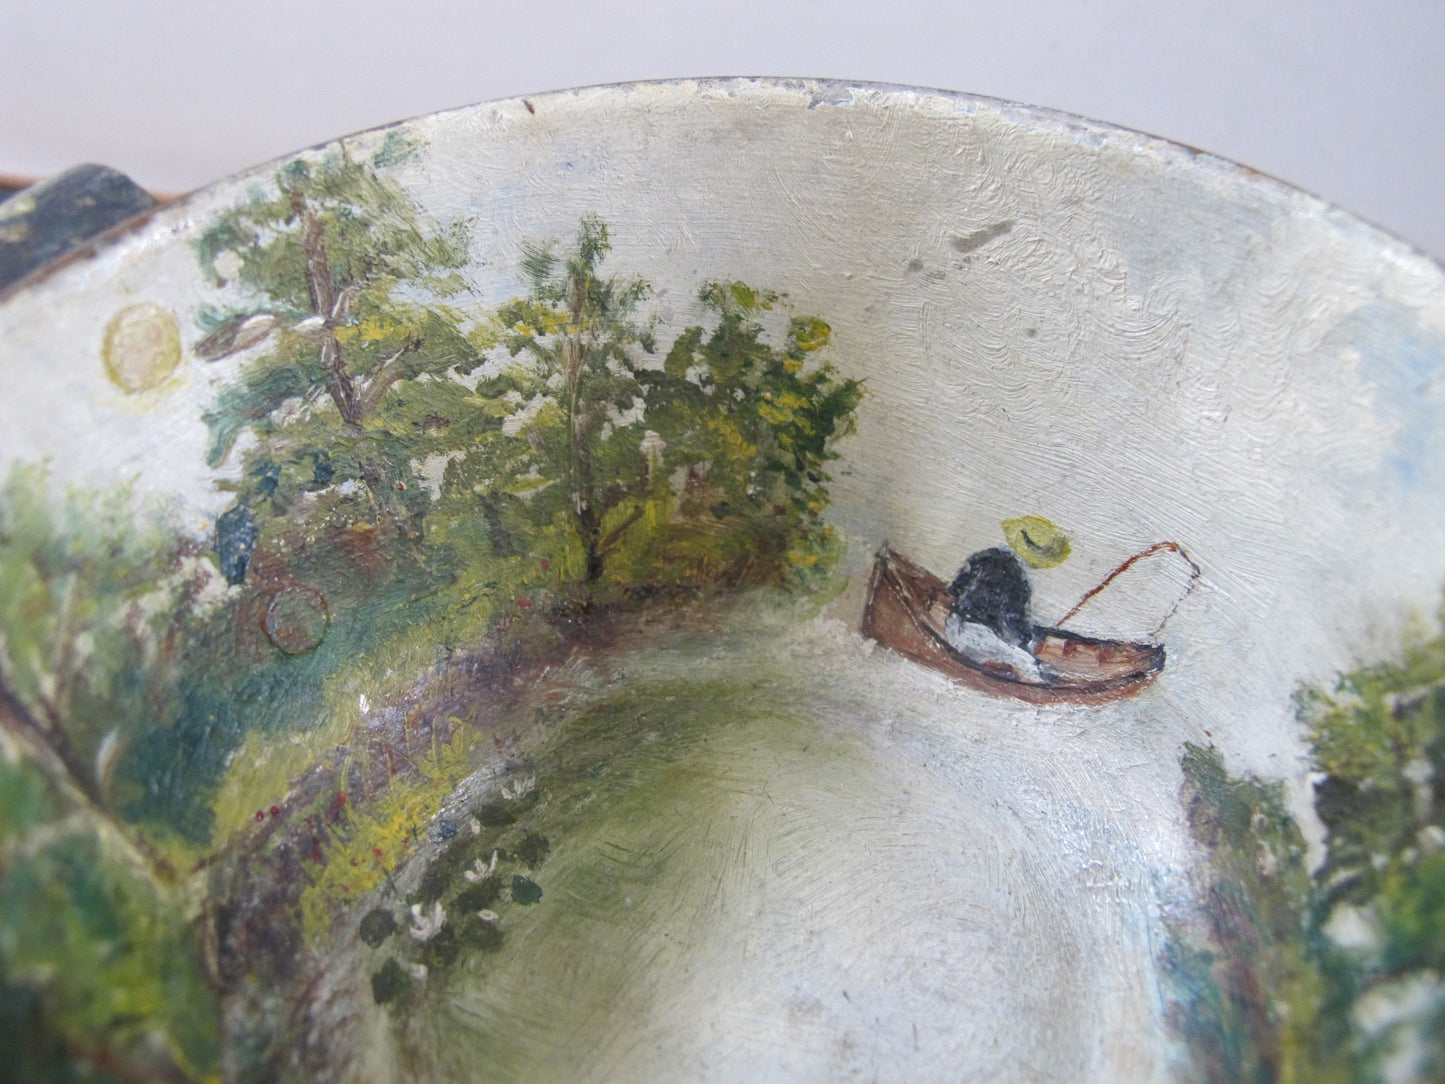 Tole Fishing Teacup Signed Dated 1890s Naive American Folk Art